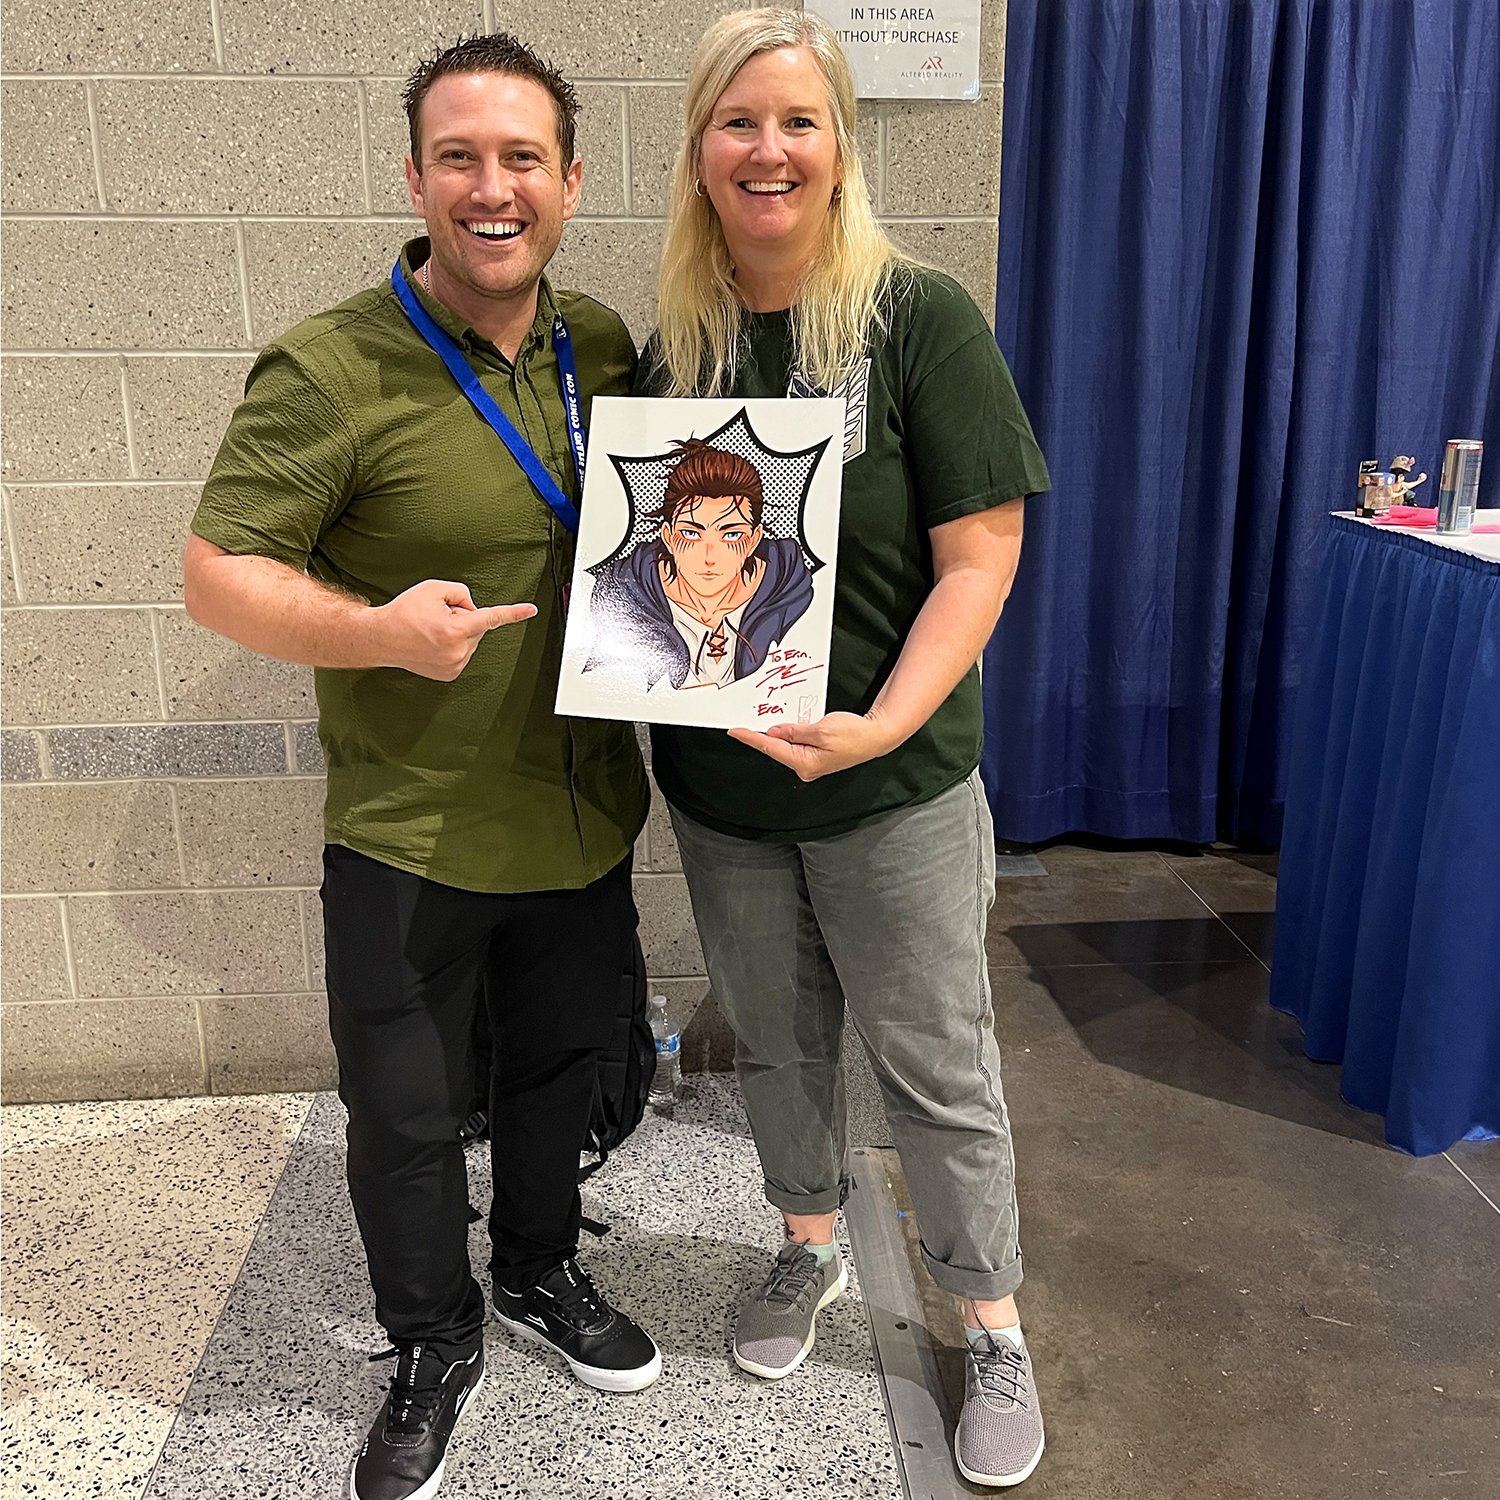 Erin and Bryce Papenbrook sq.jpg